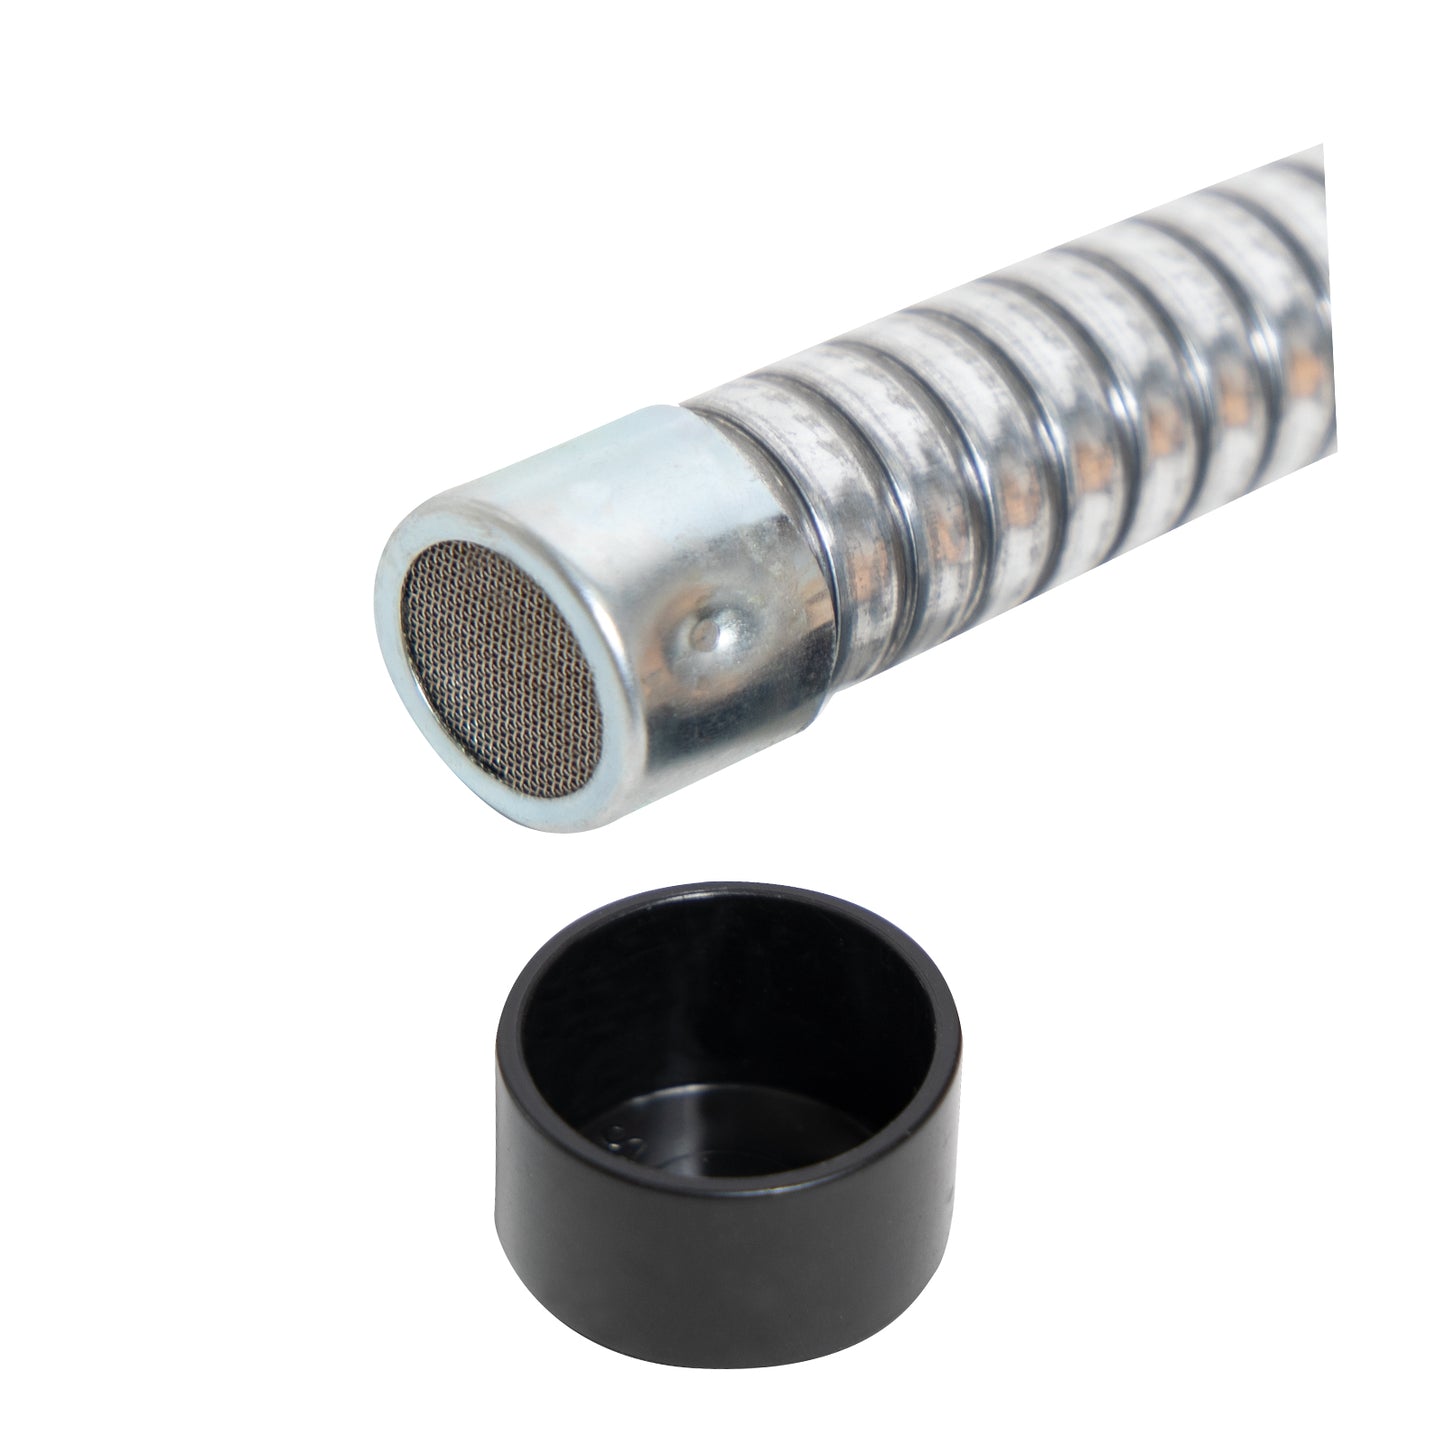 G.I. Type Unleaded Gas Nozzle - Rothco Unleaded Steel Screw-On Gas Nozzle